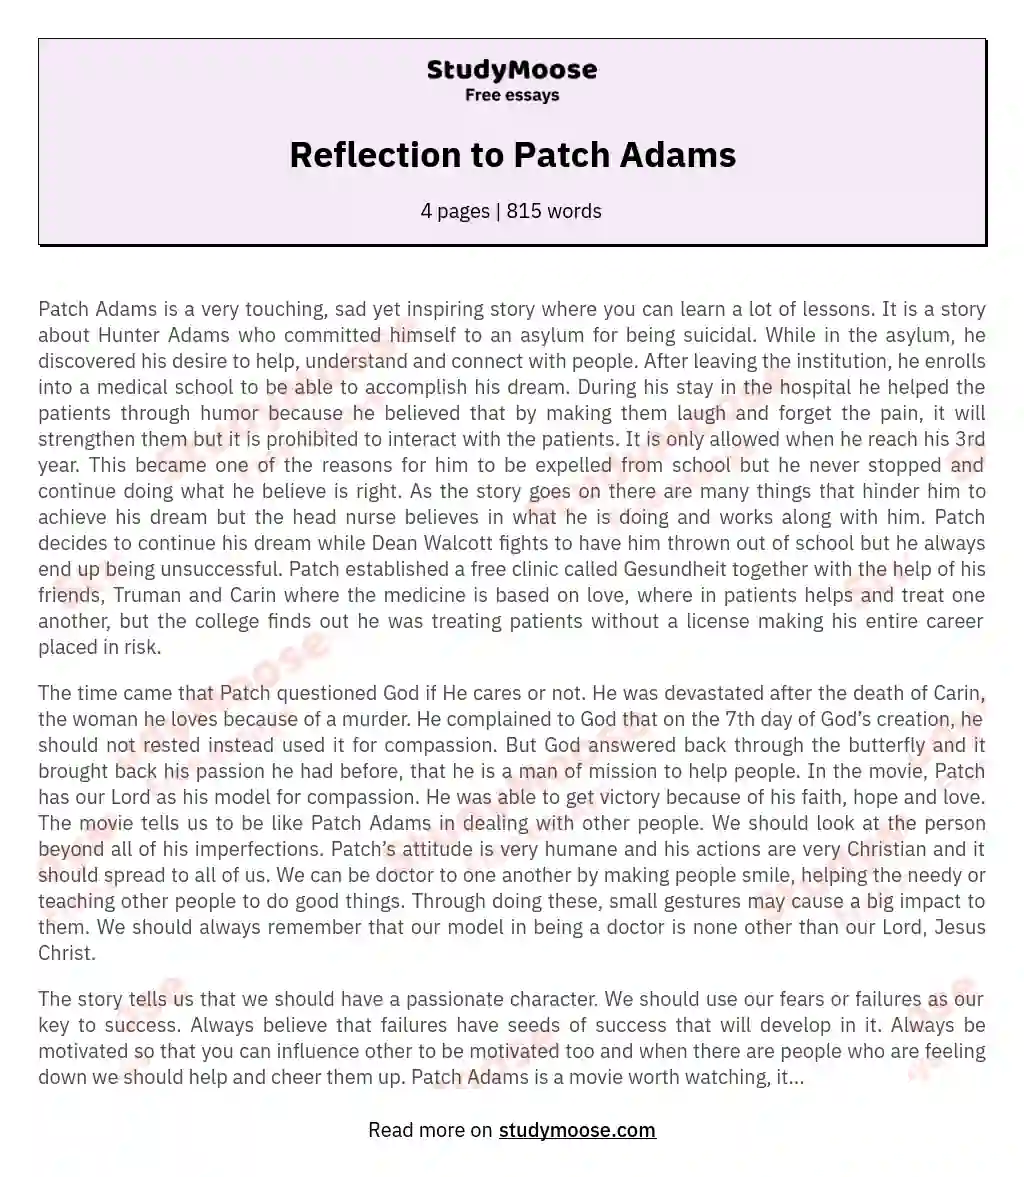 Reflection to Patch Adams essay